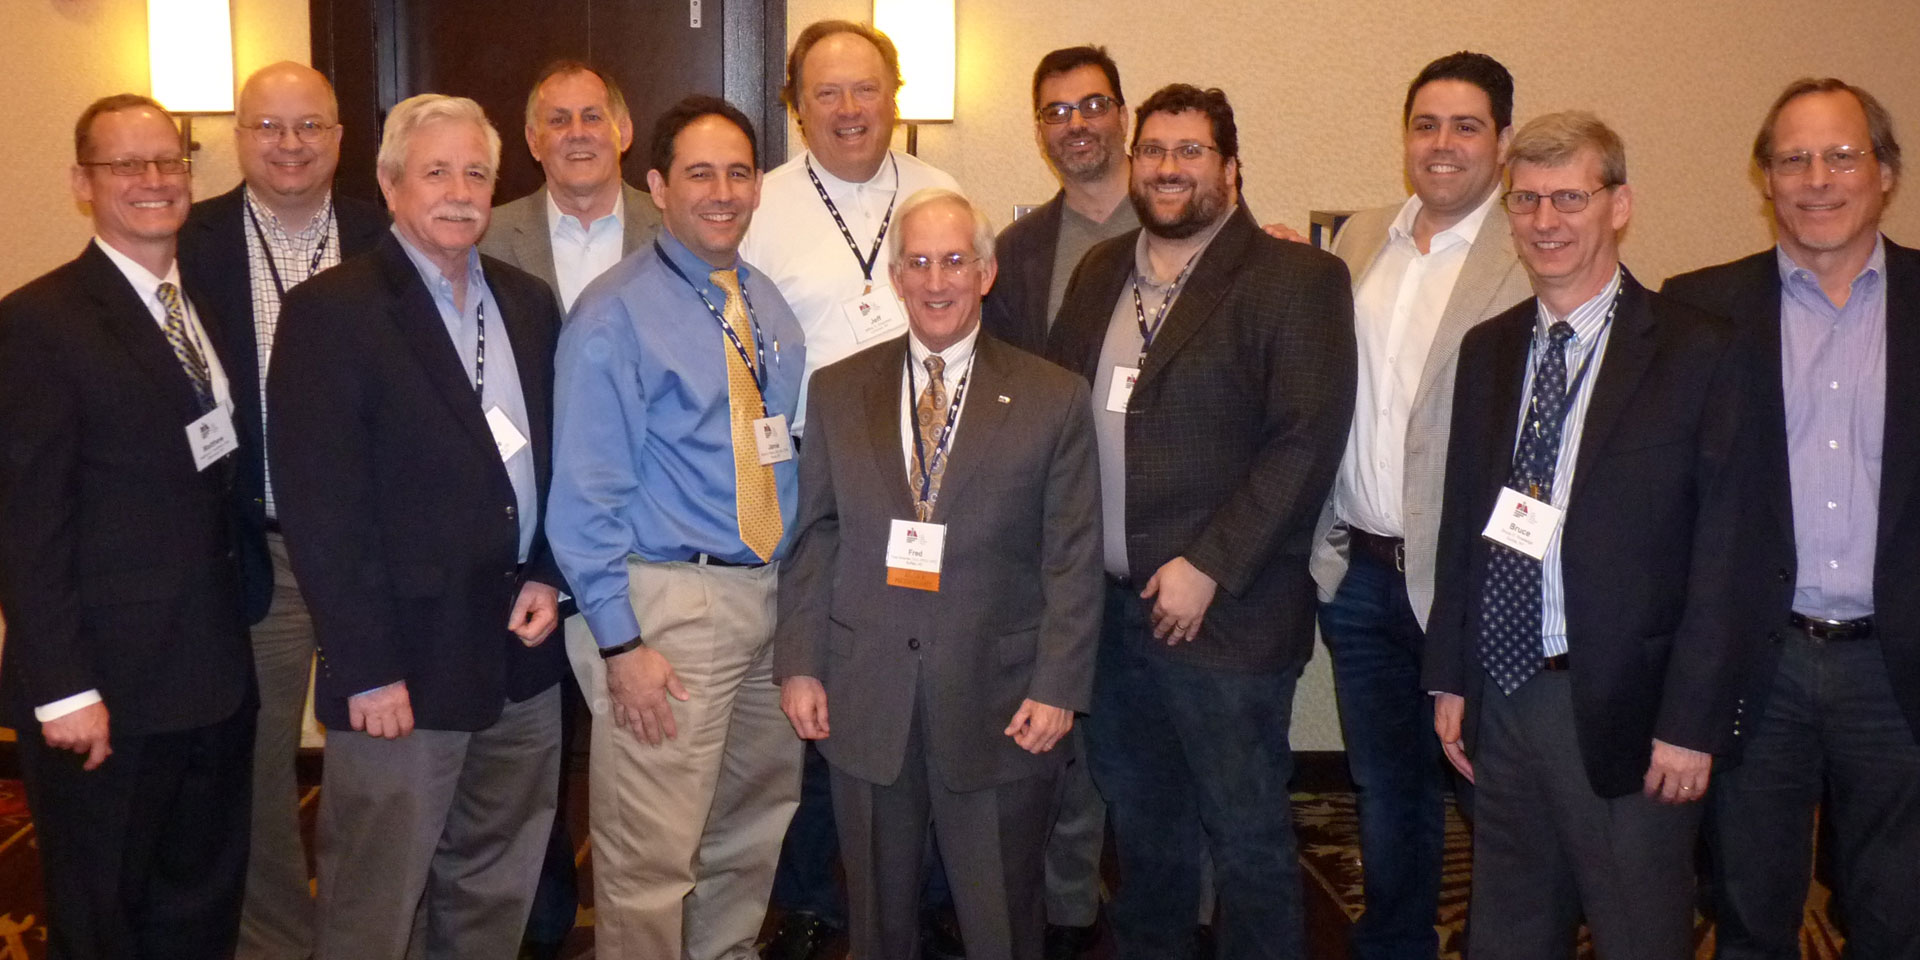 L-R: PIANY Director of Government & Industry Affairs Matthew F. Guilbault, Esq.; PIANY President John C. Parsons II, CIC, CPIA, AAI; PIANY immediate past President Gene Sandy, CIC; PIANY Vice President John Tomassi, CPCU; PIANY First Vice President Jamie Ferris, CIC, AAI, CPIA; PIANY past President Jeffrey H. Greenfield; PIANY President-elect Fred Holender, CLU, CPCU, ChFC, MSFS; PIANY Secretary Anthony Kammas; PIANY-YIP President Jason E. Bartow; PIANY Director Gino A. Orrino, CPIA; PIANY Treasurer Bruce D. Rowledge and PIANY Director Eric T. Clauss.